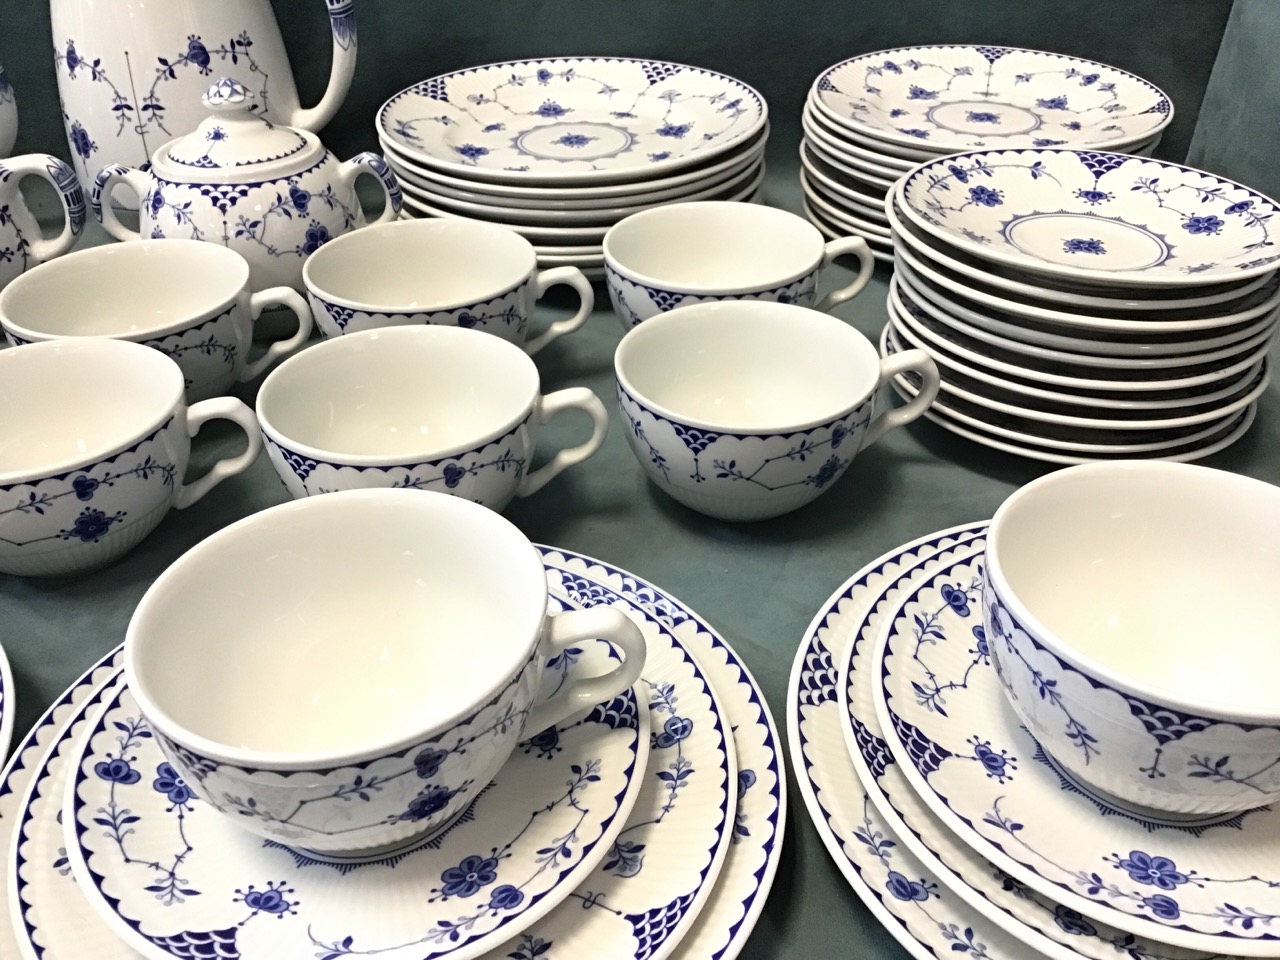 A Johnson Brothers dinner service in the Denmark Blue pattern with cups, saucers, plates, teapot, - Image 3 of 3